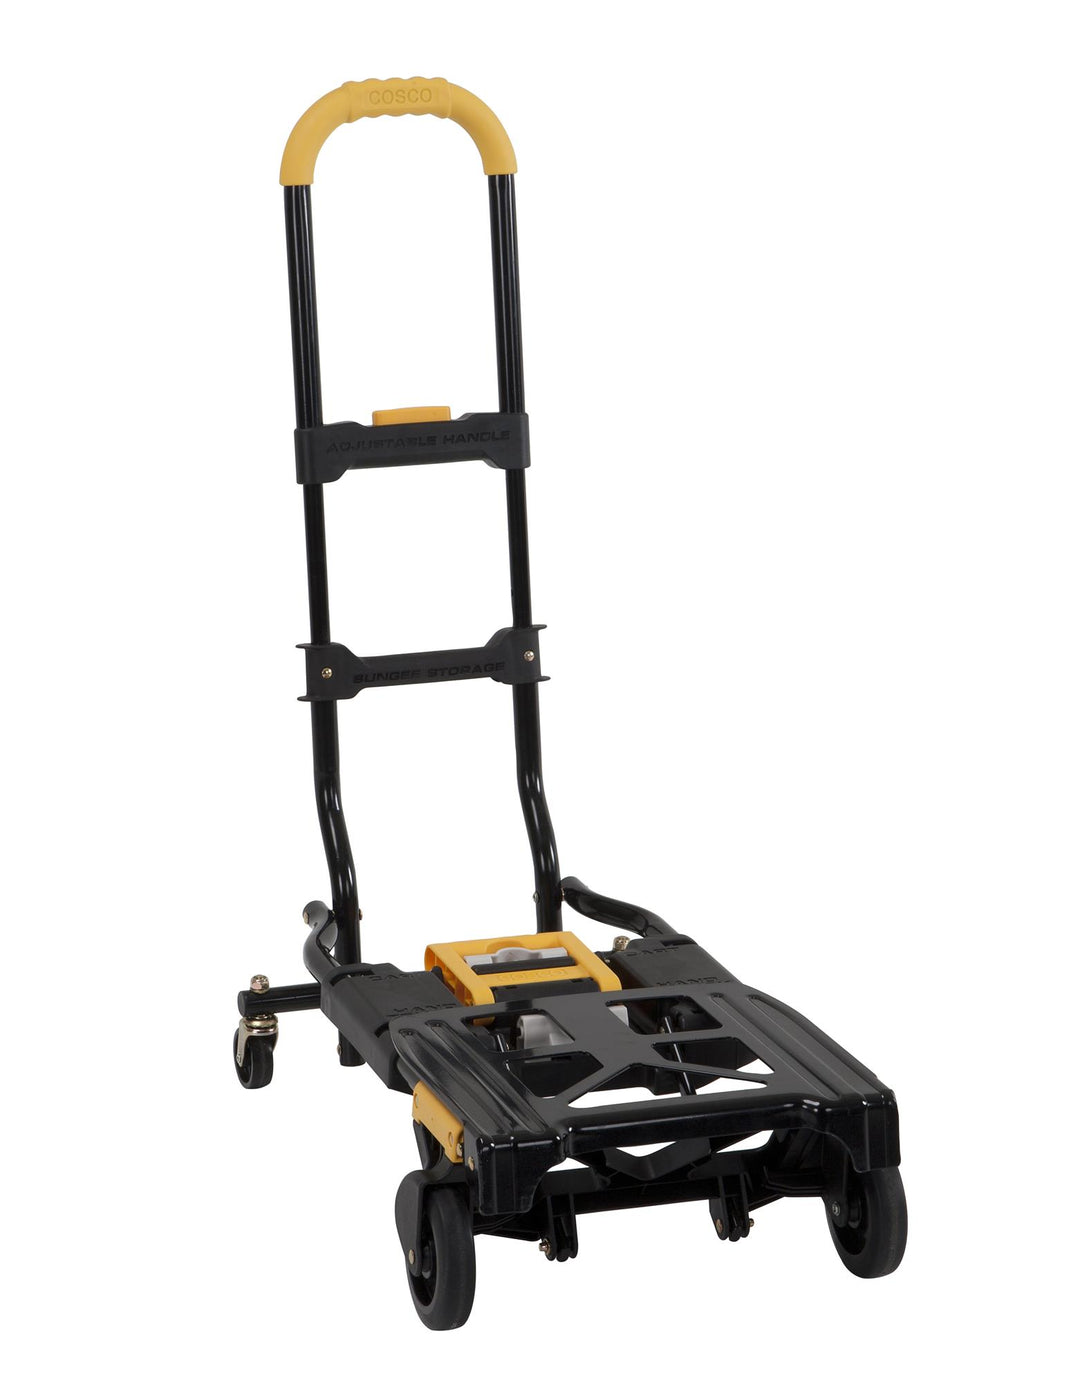 2 in 1 Multi-Position Hand Truck with Extendable Handle -  Black/Black/Yellow